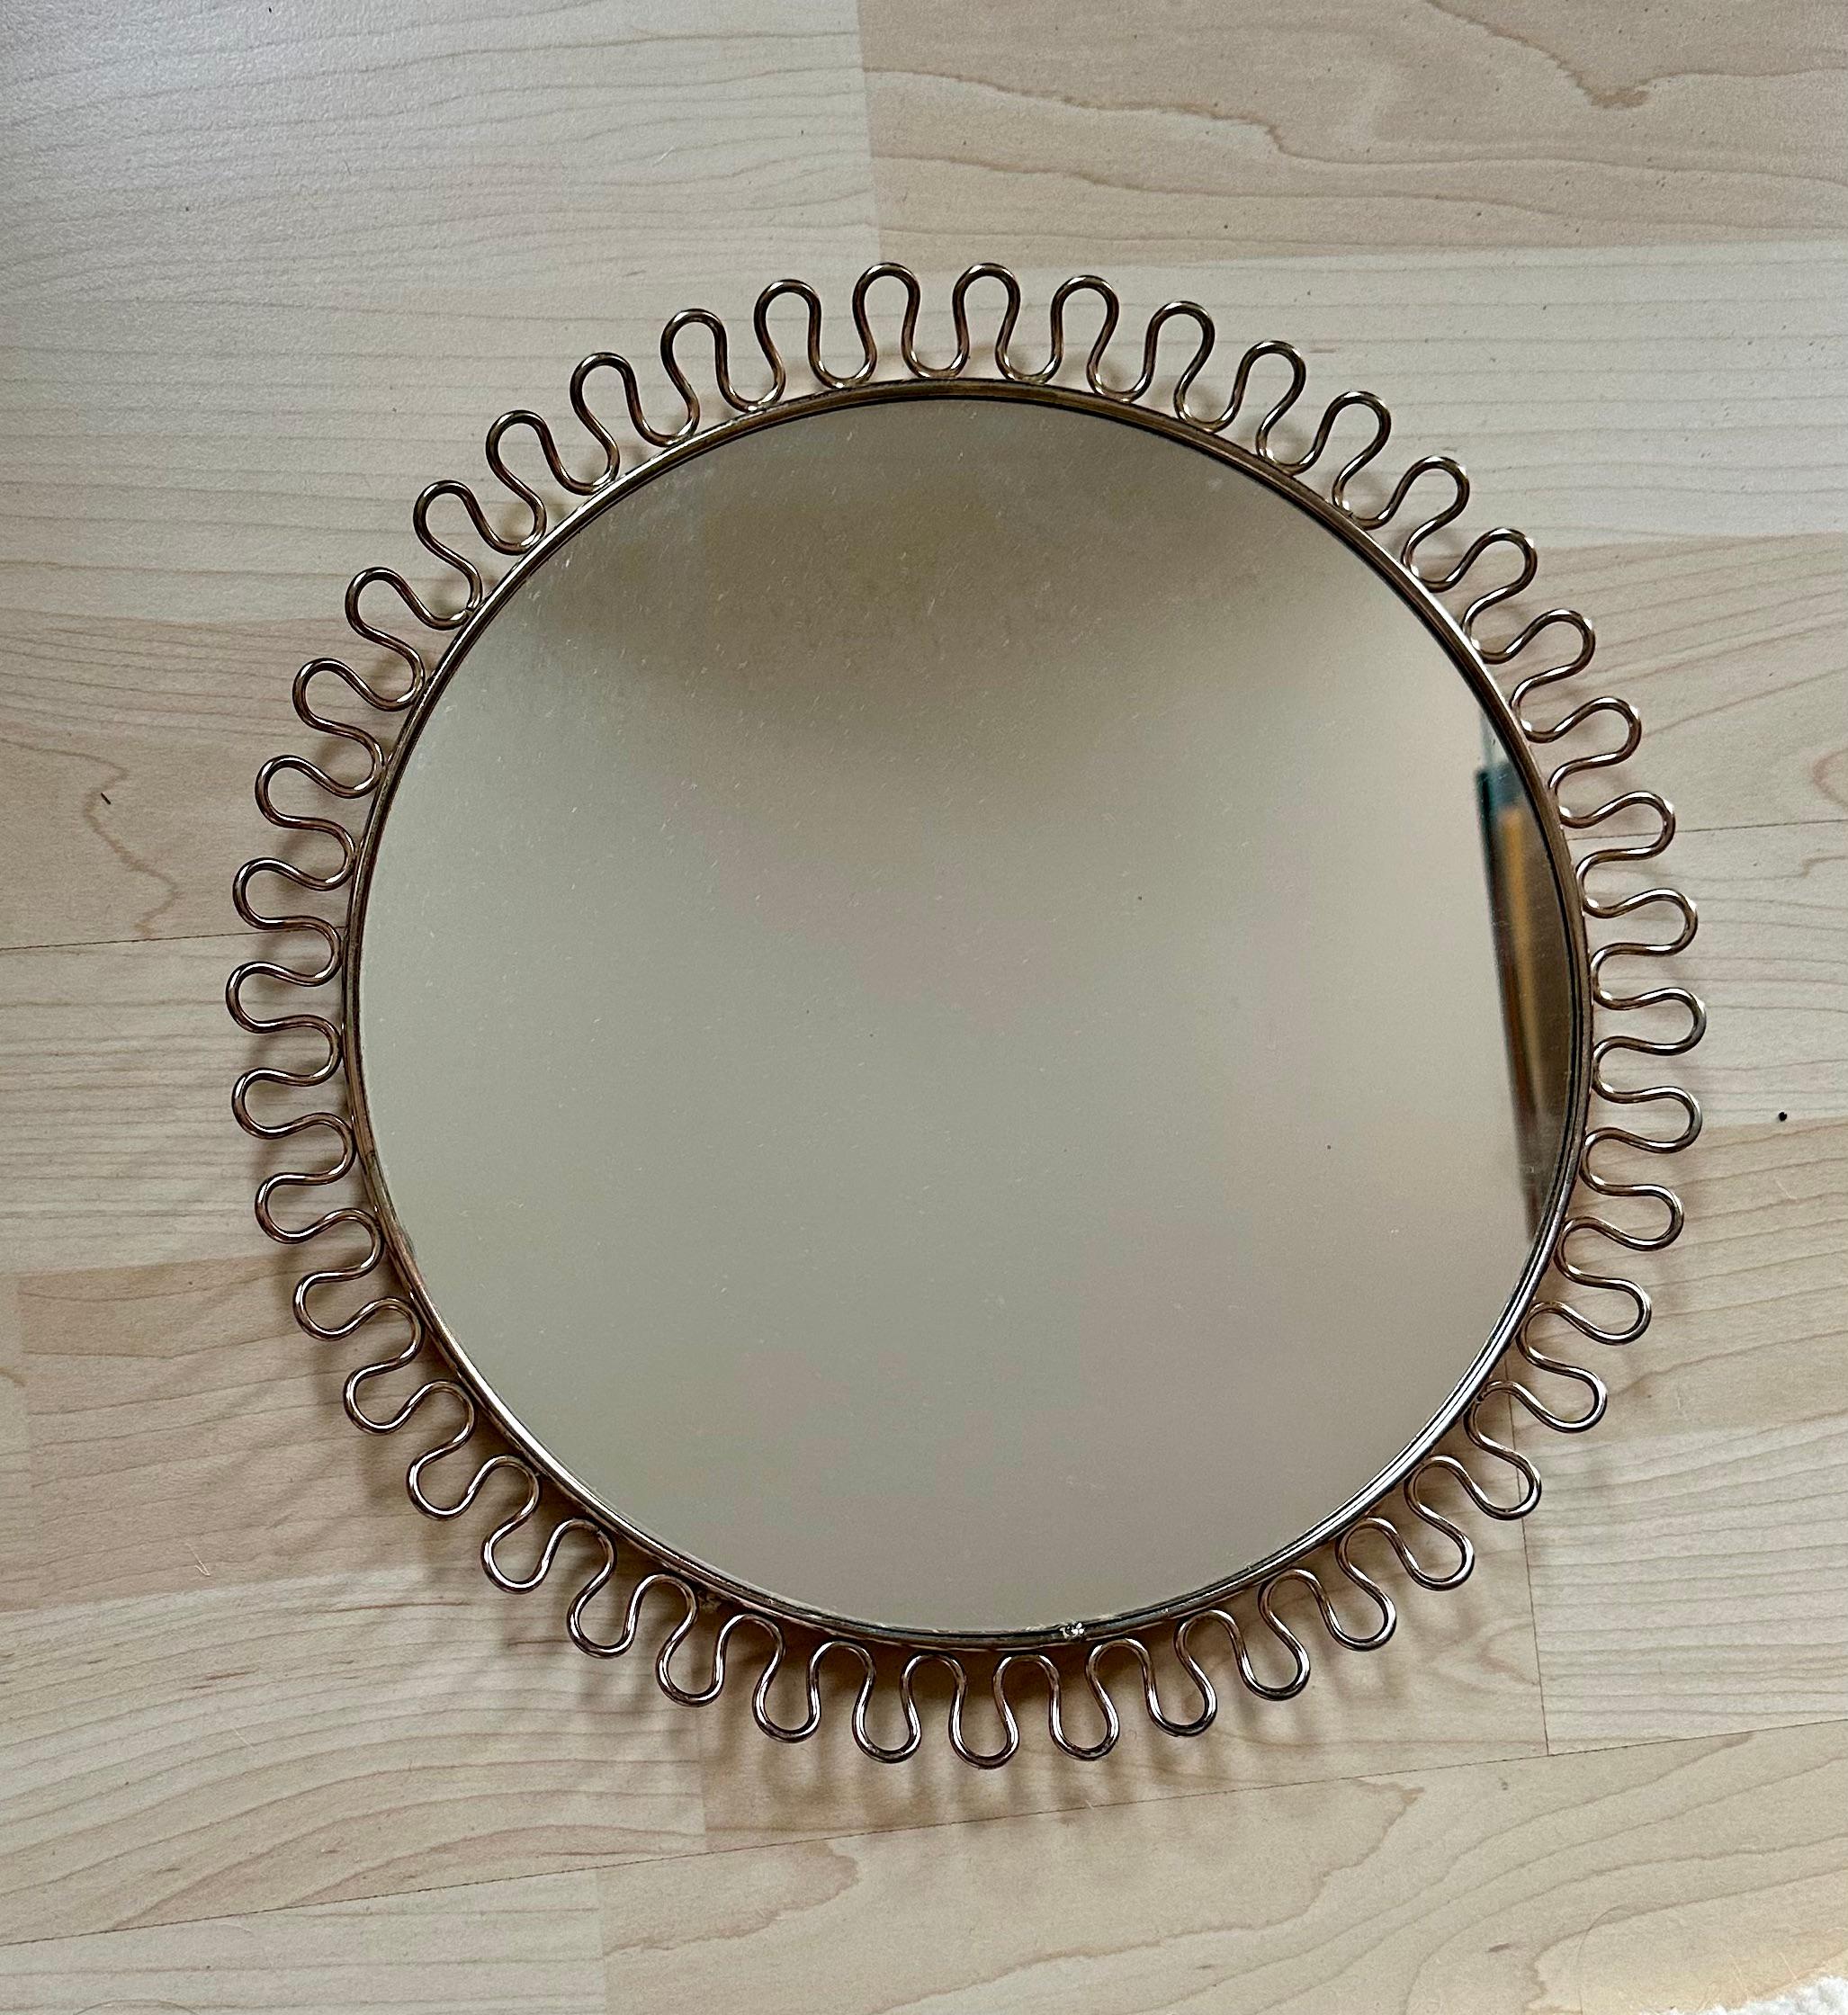 This small mid century mirror by Joseph Frank was designed and manufactured for Svenskt Tenn during the 1950s.
It is made of brass and has an original cord for hanging.
 Josef Frank was born in Austria in 1885. He was an architect, a designer,